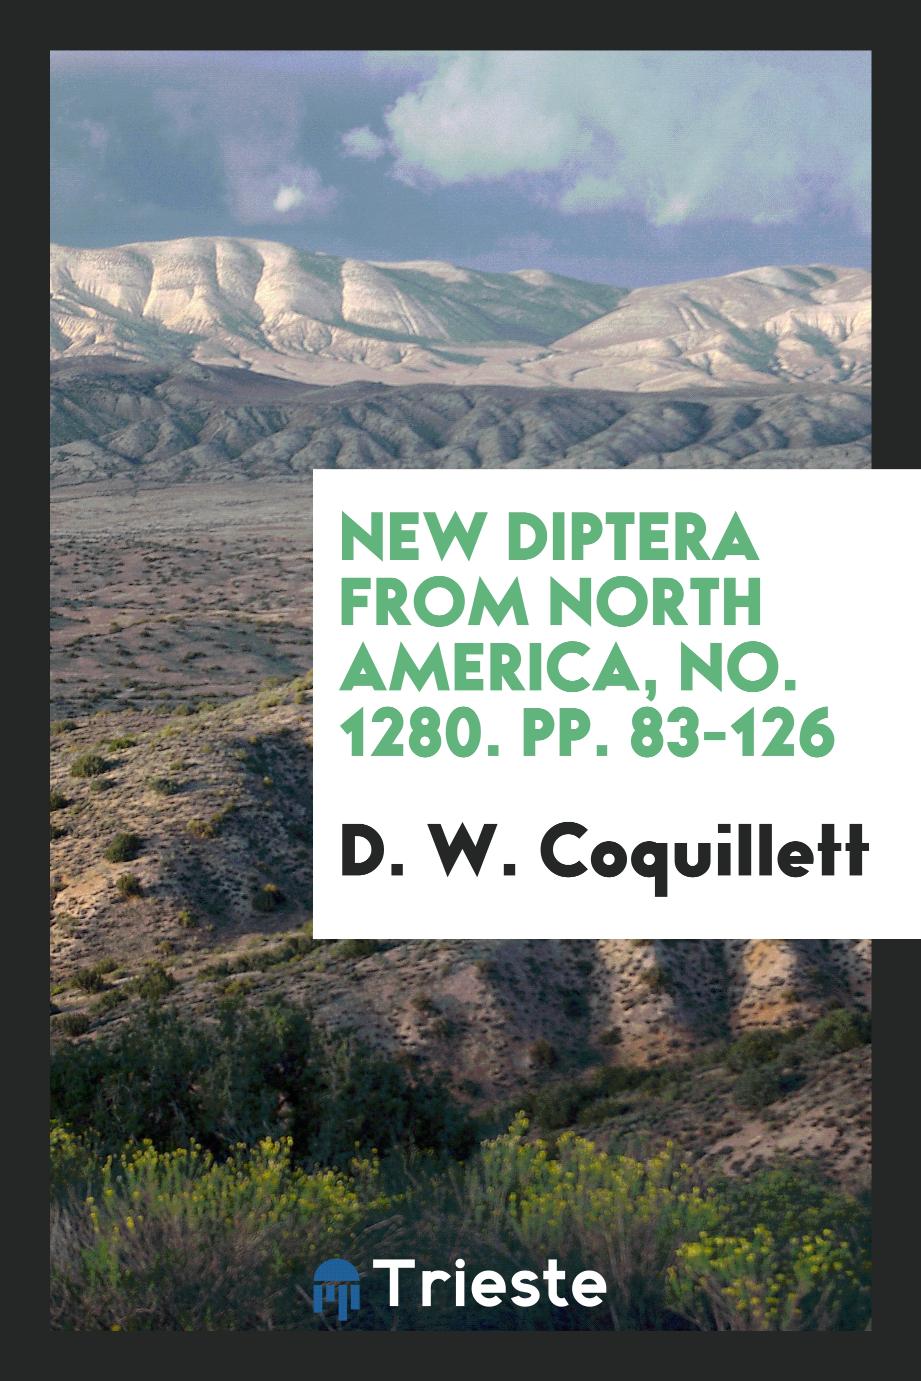 New Diptera from North America, No. 1280. pp. 83-126